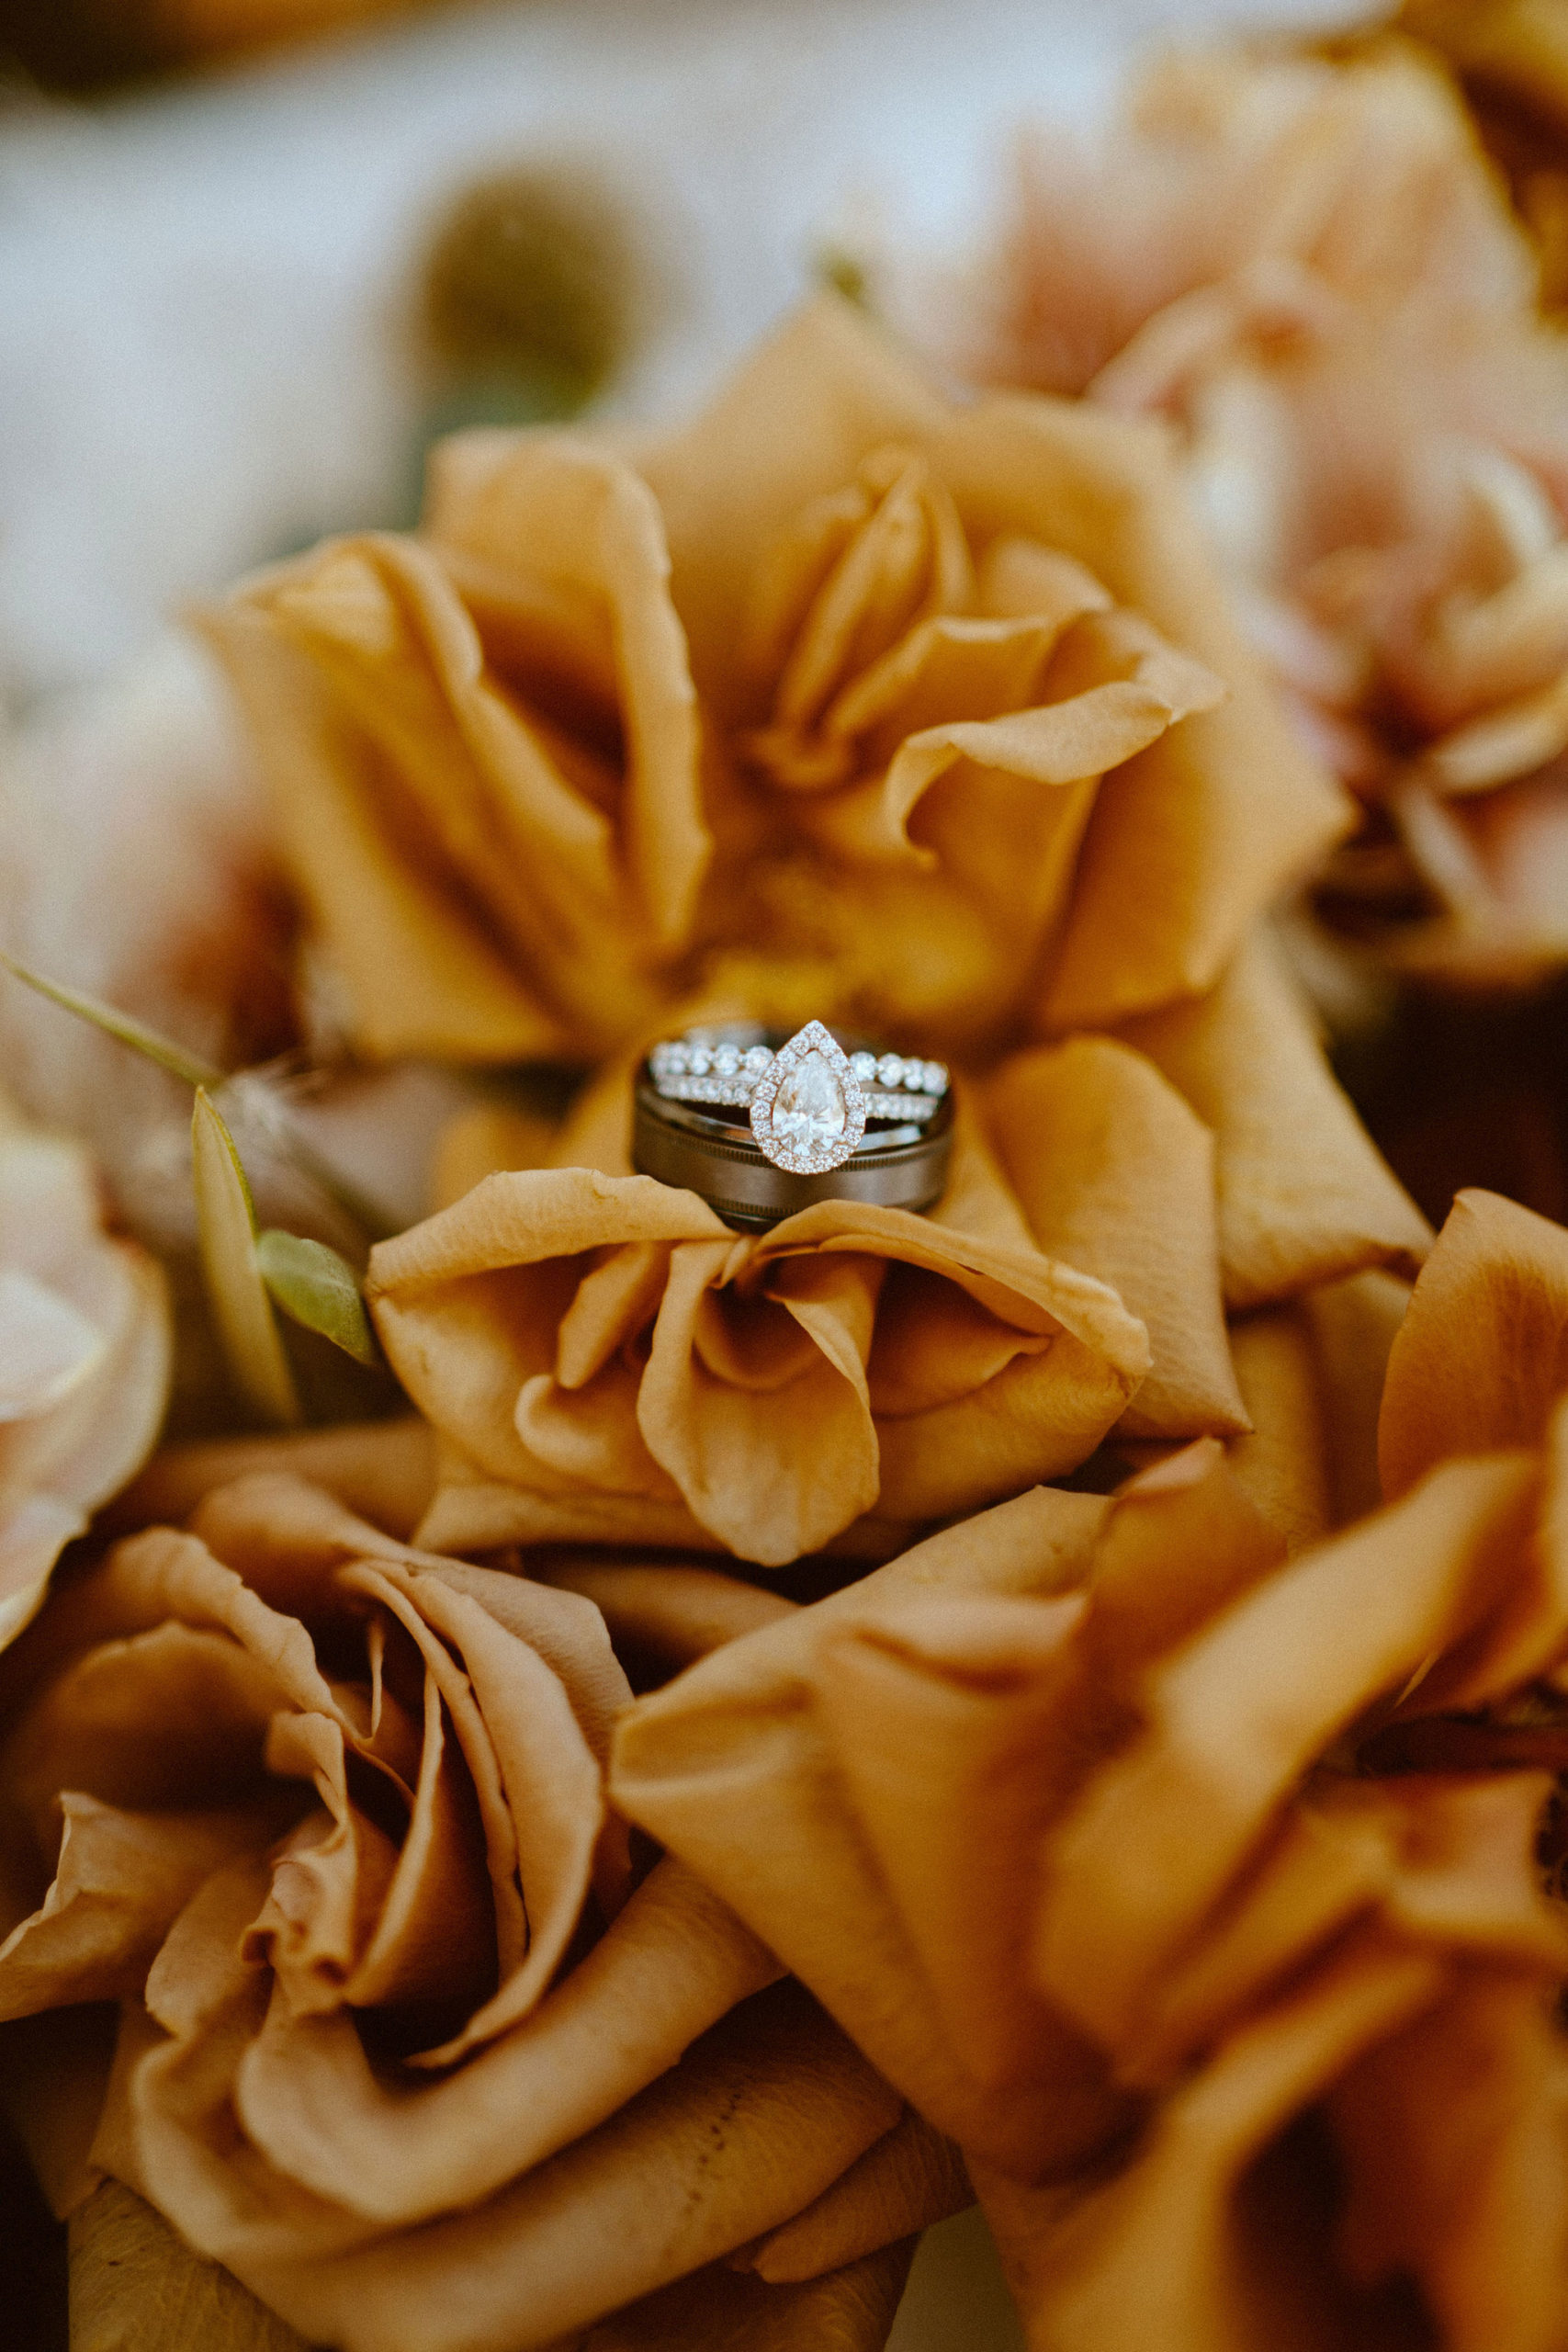 The bride and grooms wedding rings placed on toffee colored roses